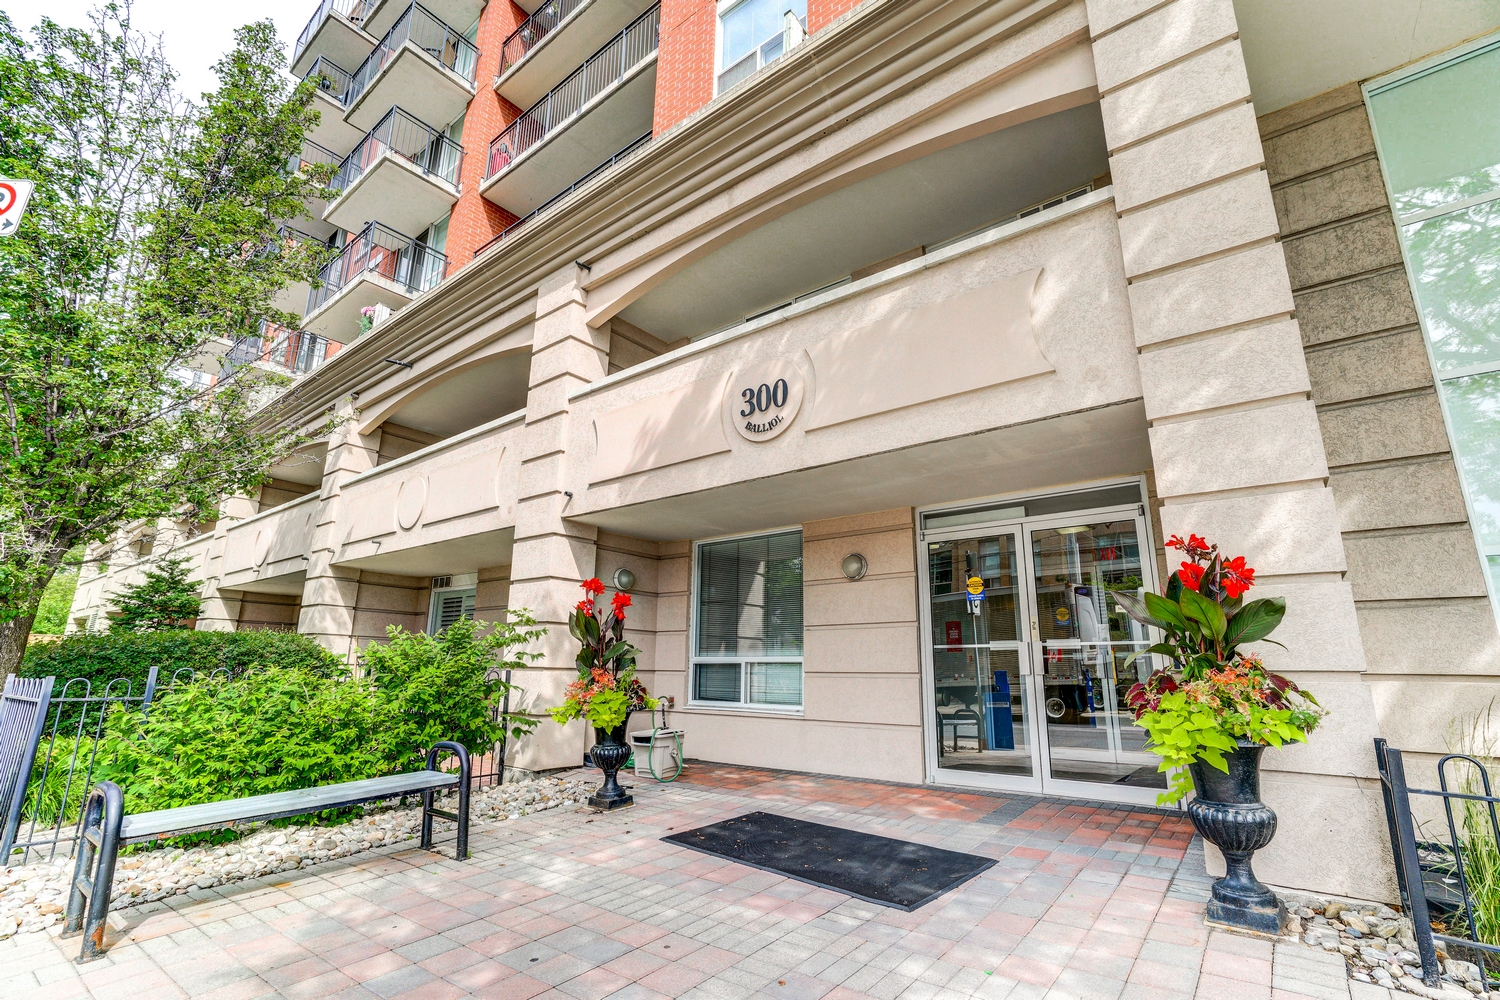 This condo is now sold – congratulations to both the Seller & the Buyers